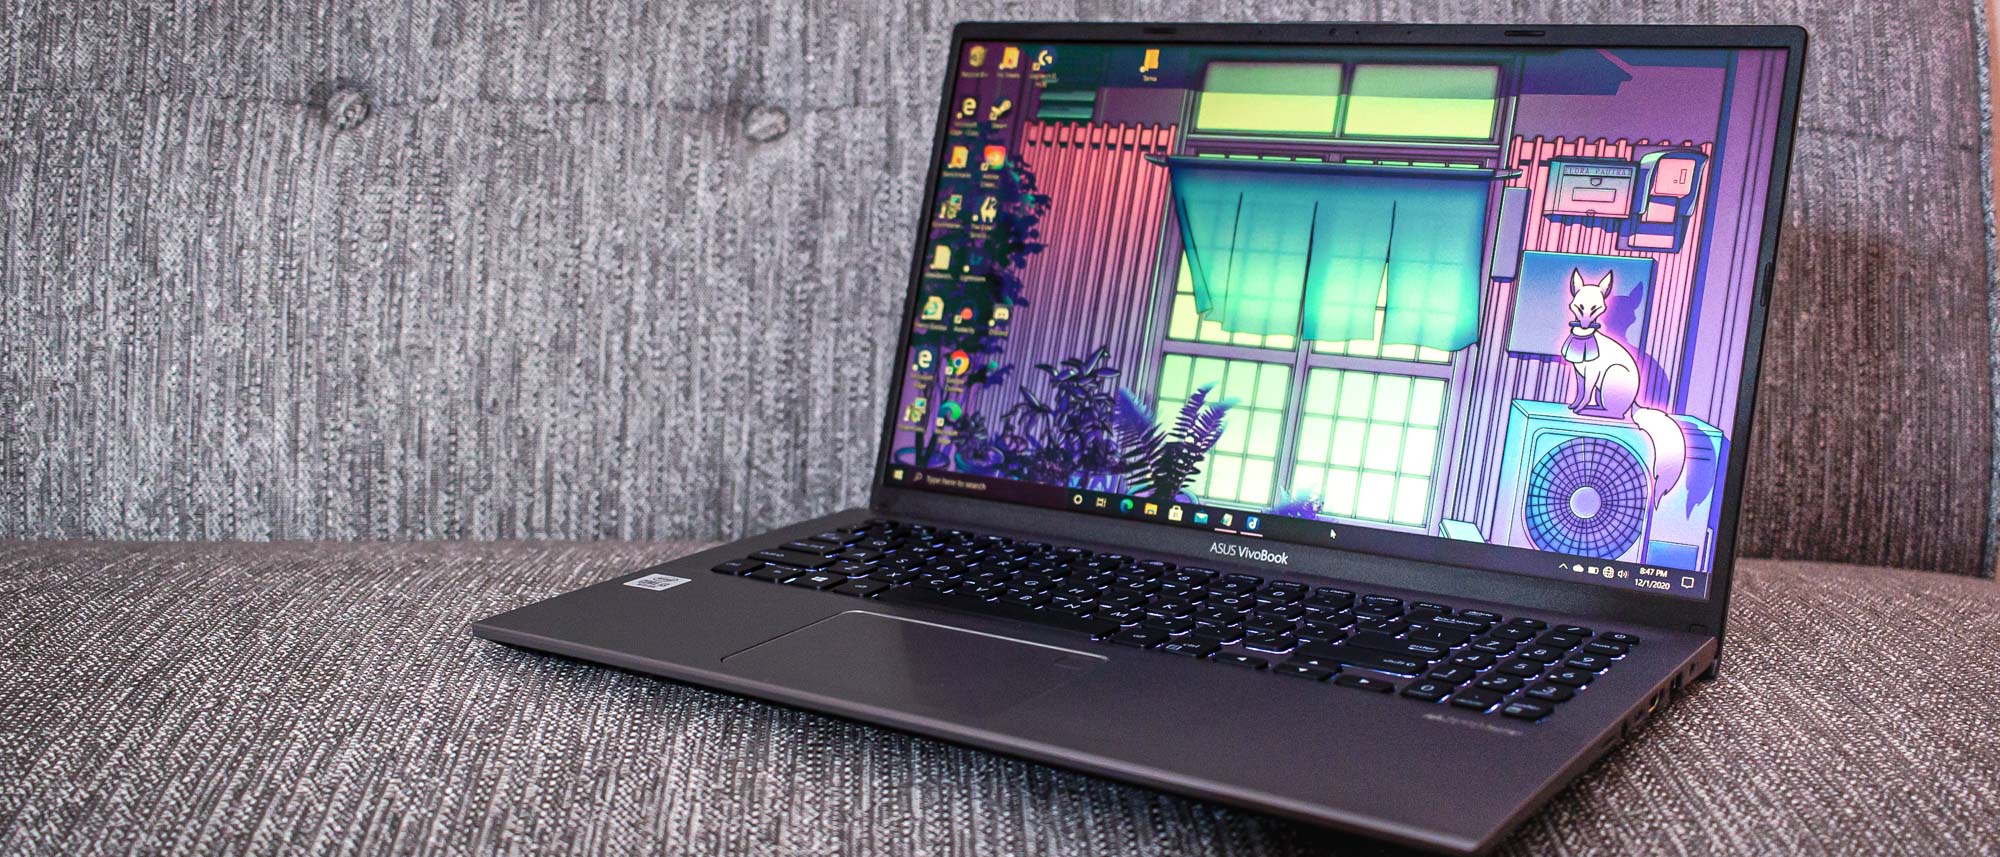 Asus VivoBook 15 review — a budget laptop with low-budget battery life